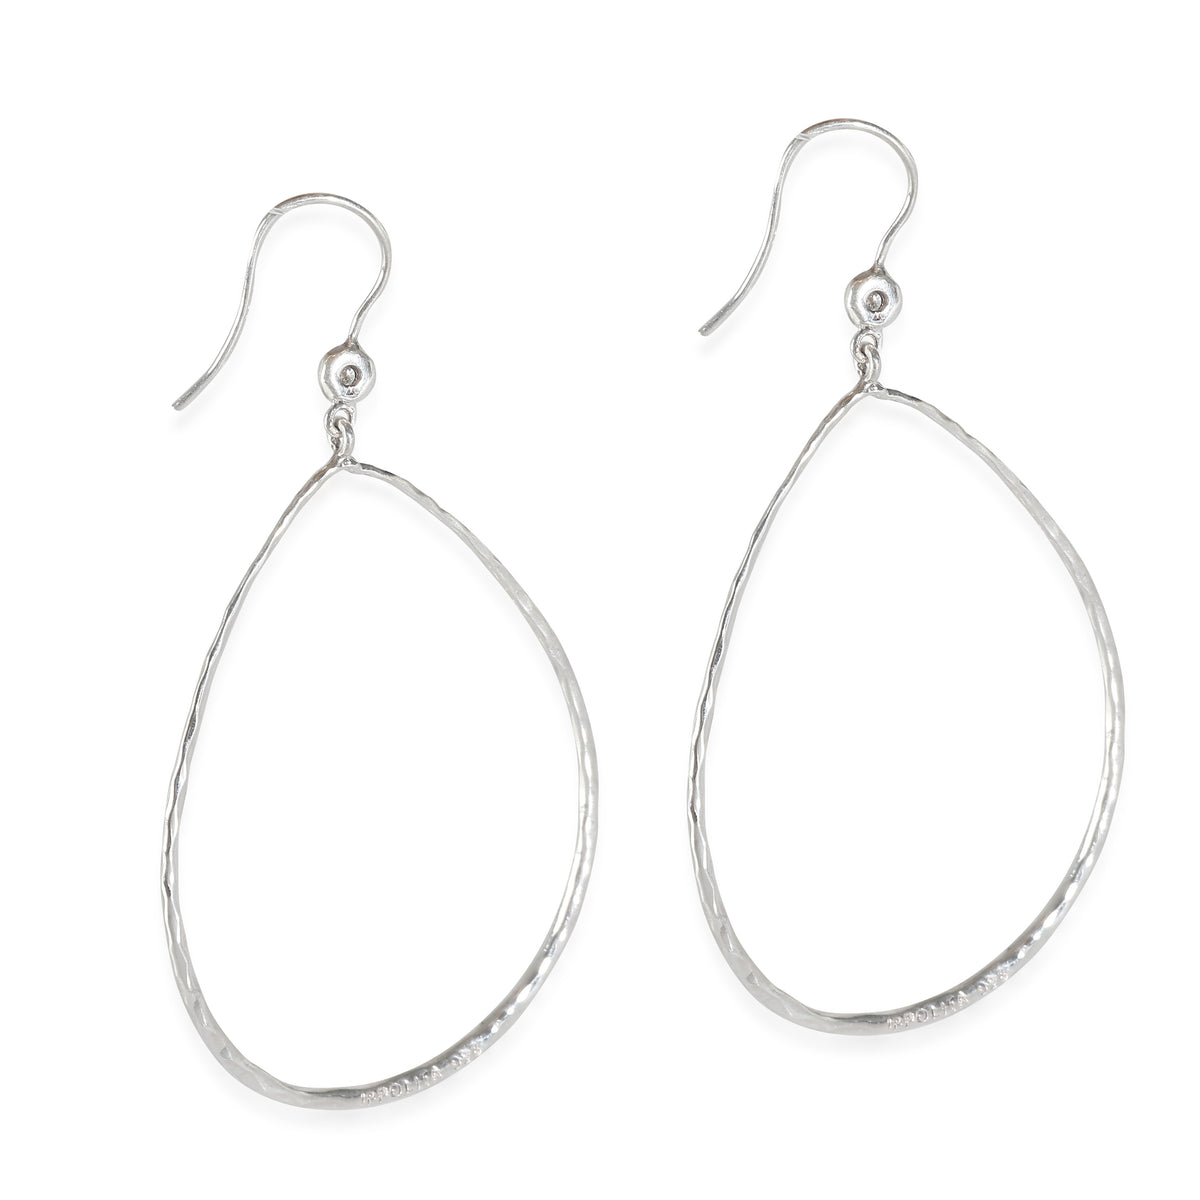 ppolita Classico Hammered Teardrop Earrings with Diamonds in Sterling Silver